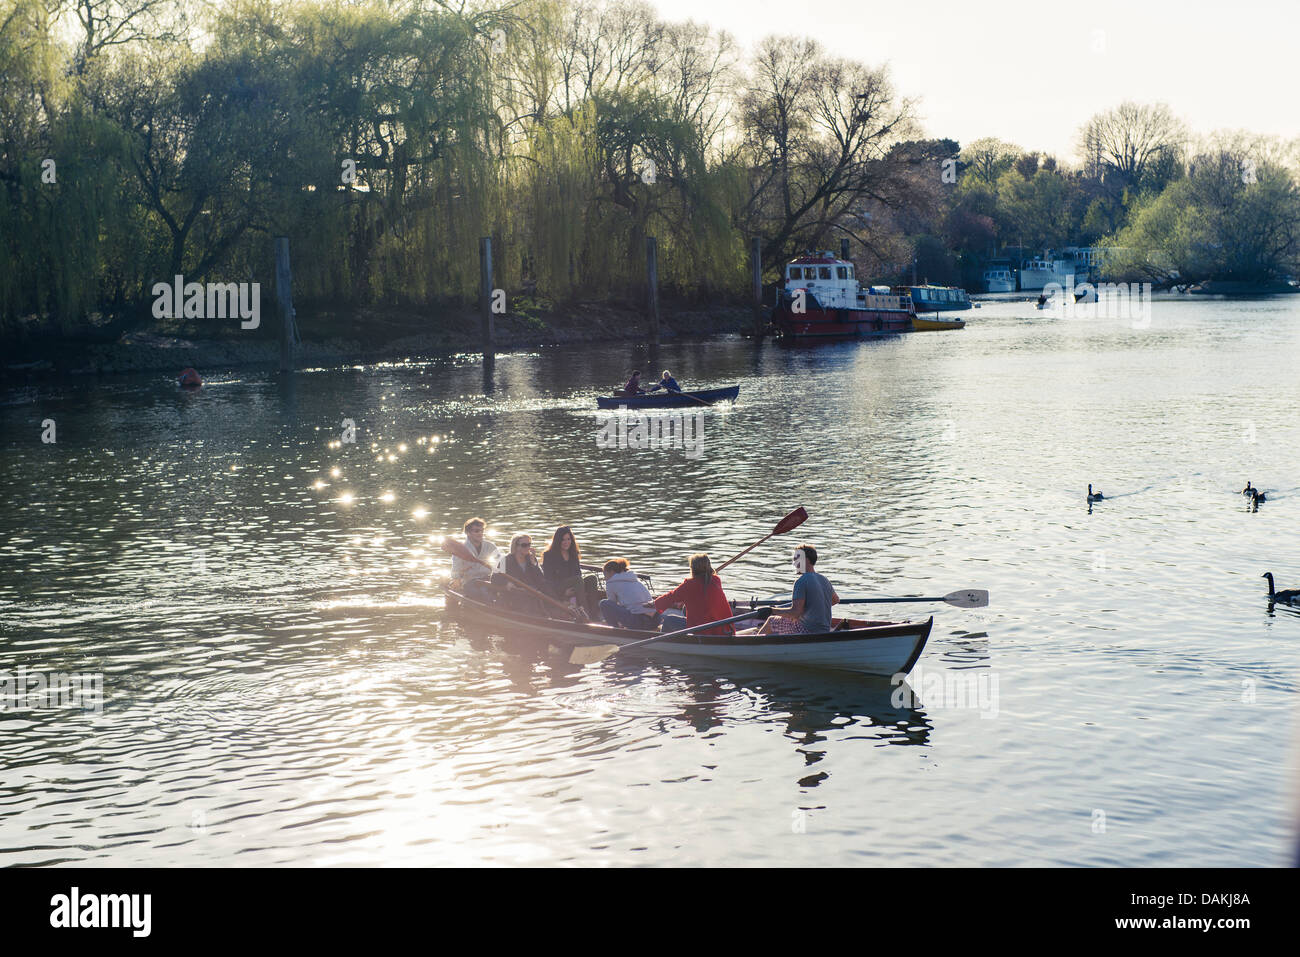 A family on a boat on the Thames in Richmond, London Stock Photo